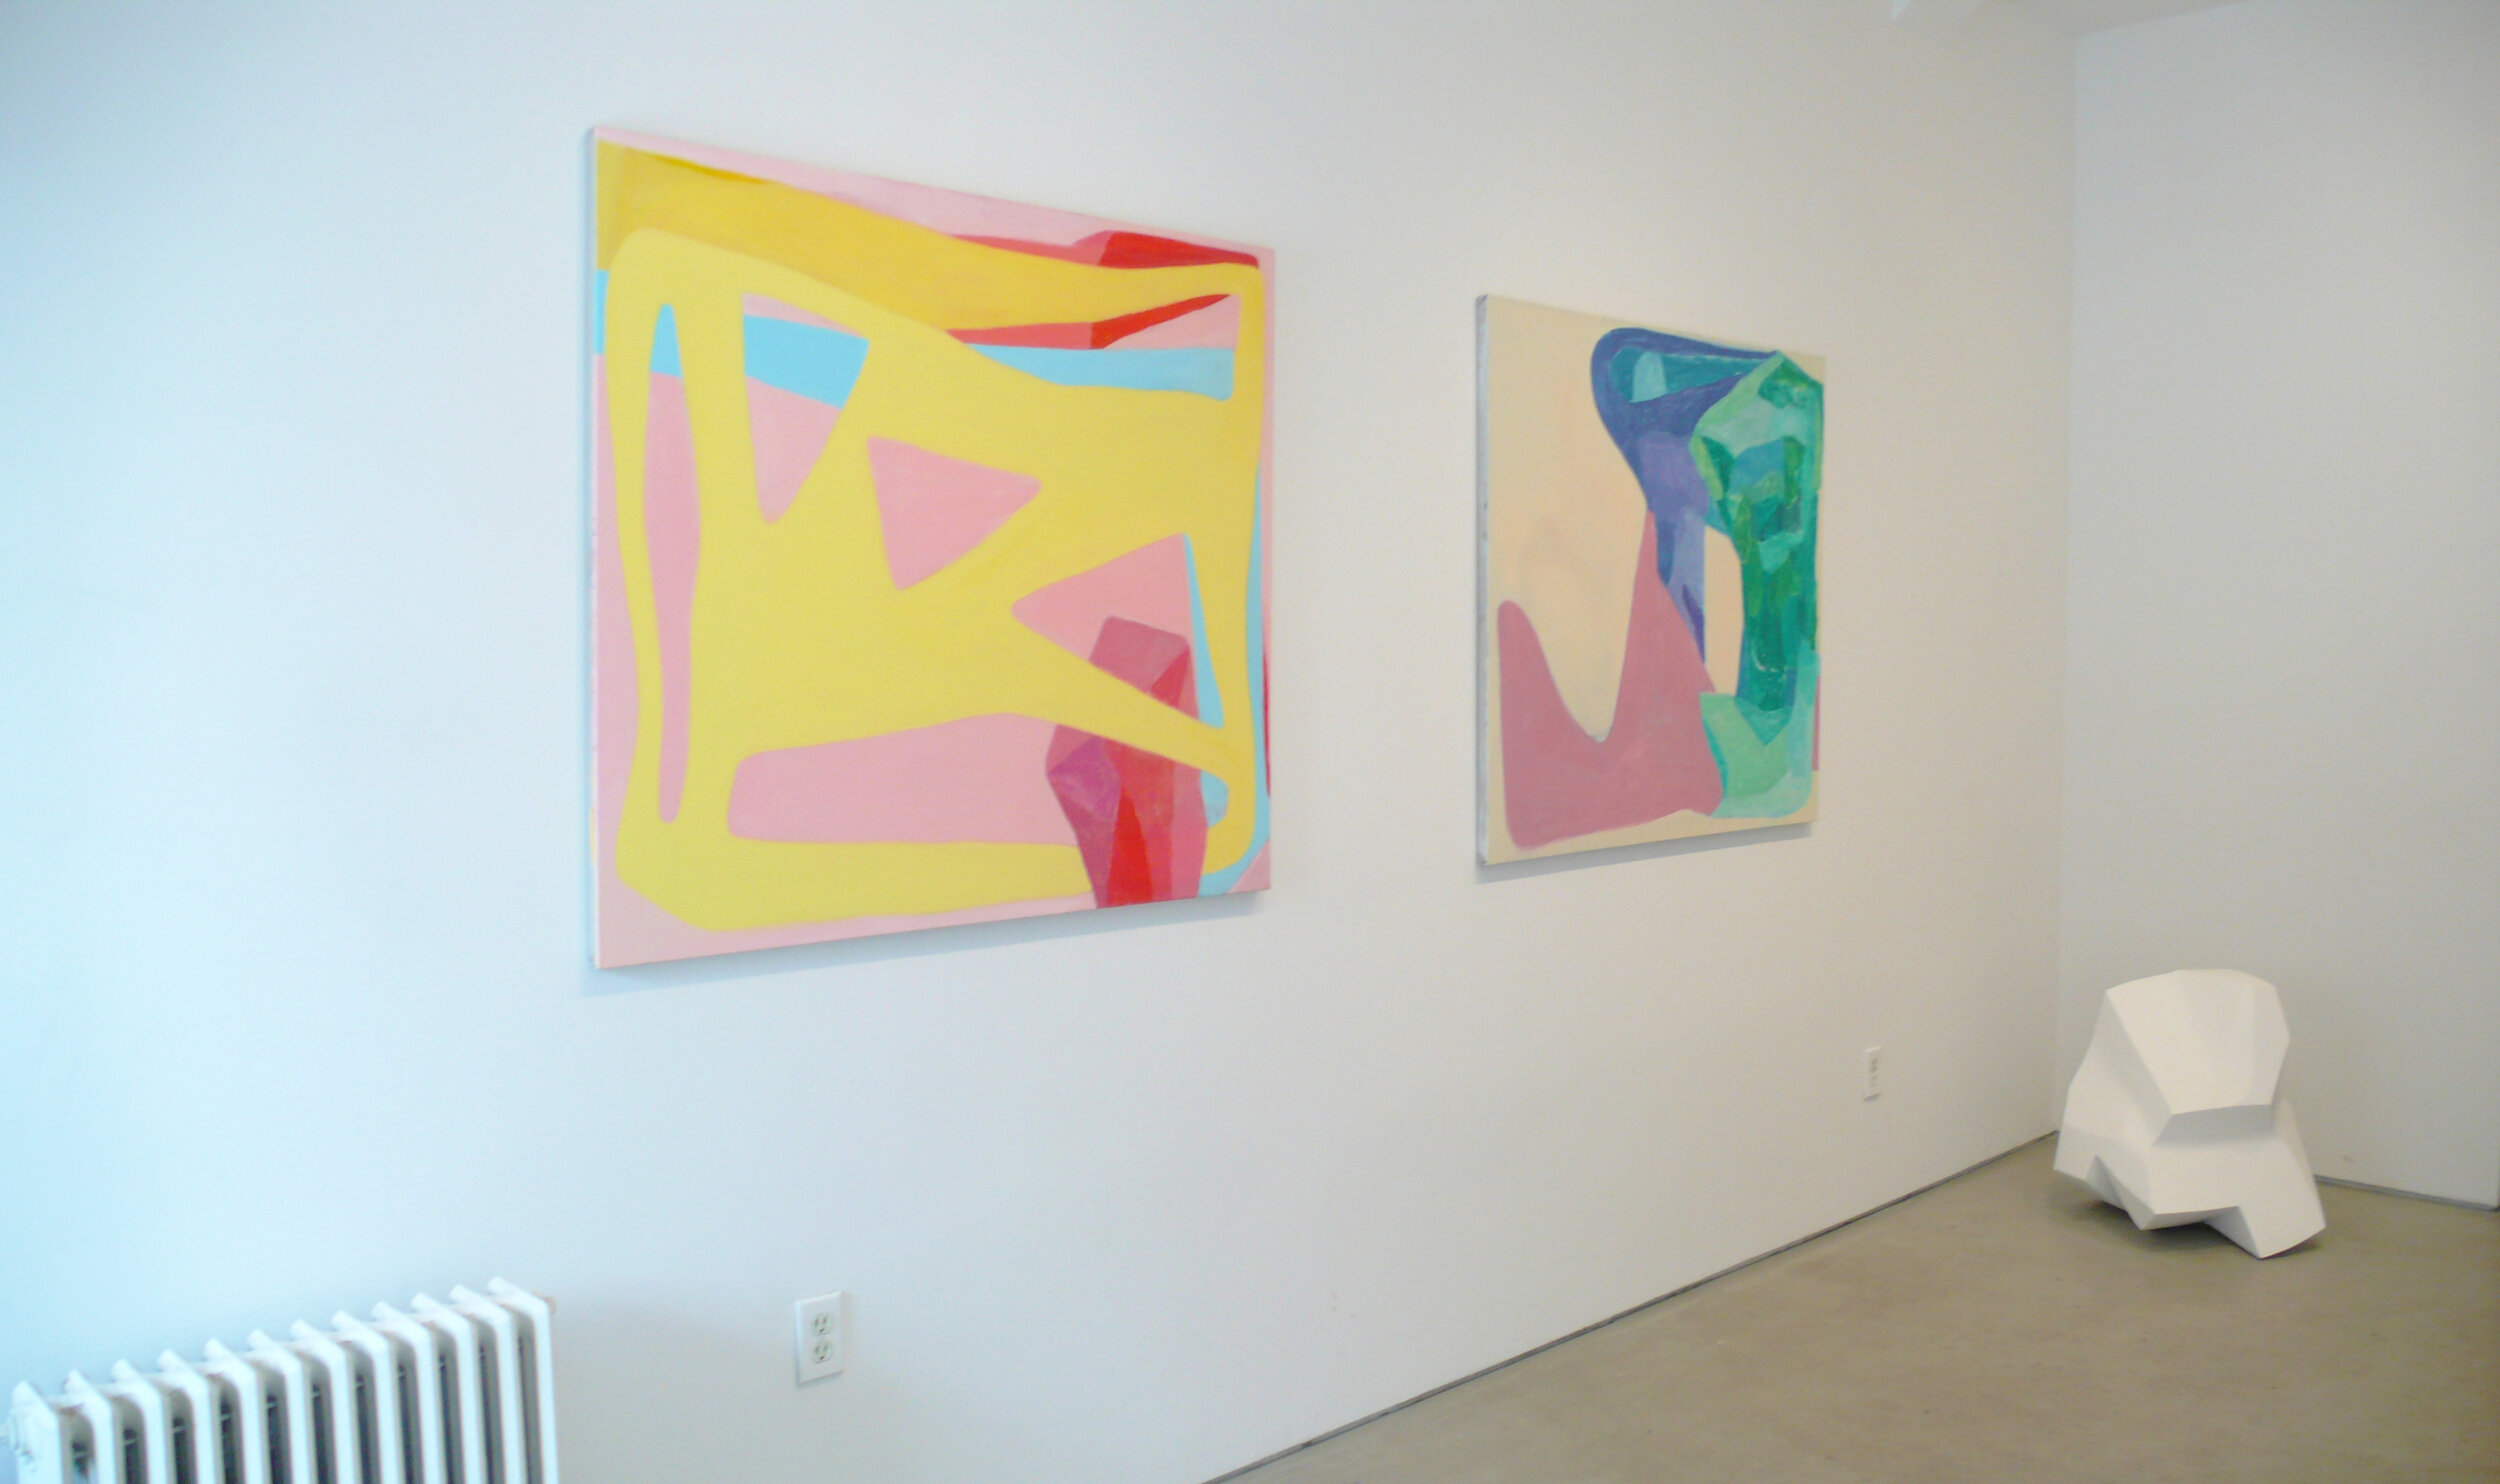  Installation image from the 2010 Charles Dunn exhibition, Demons, at Cindy Rucker Gallery